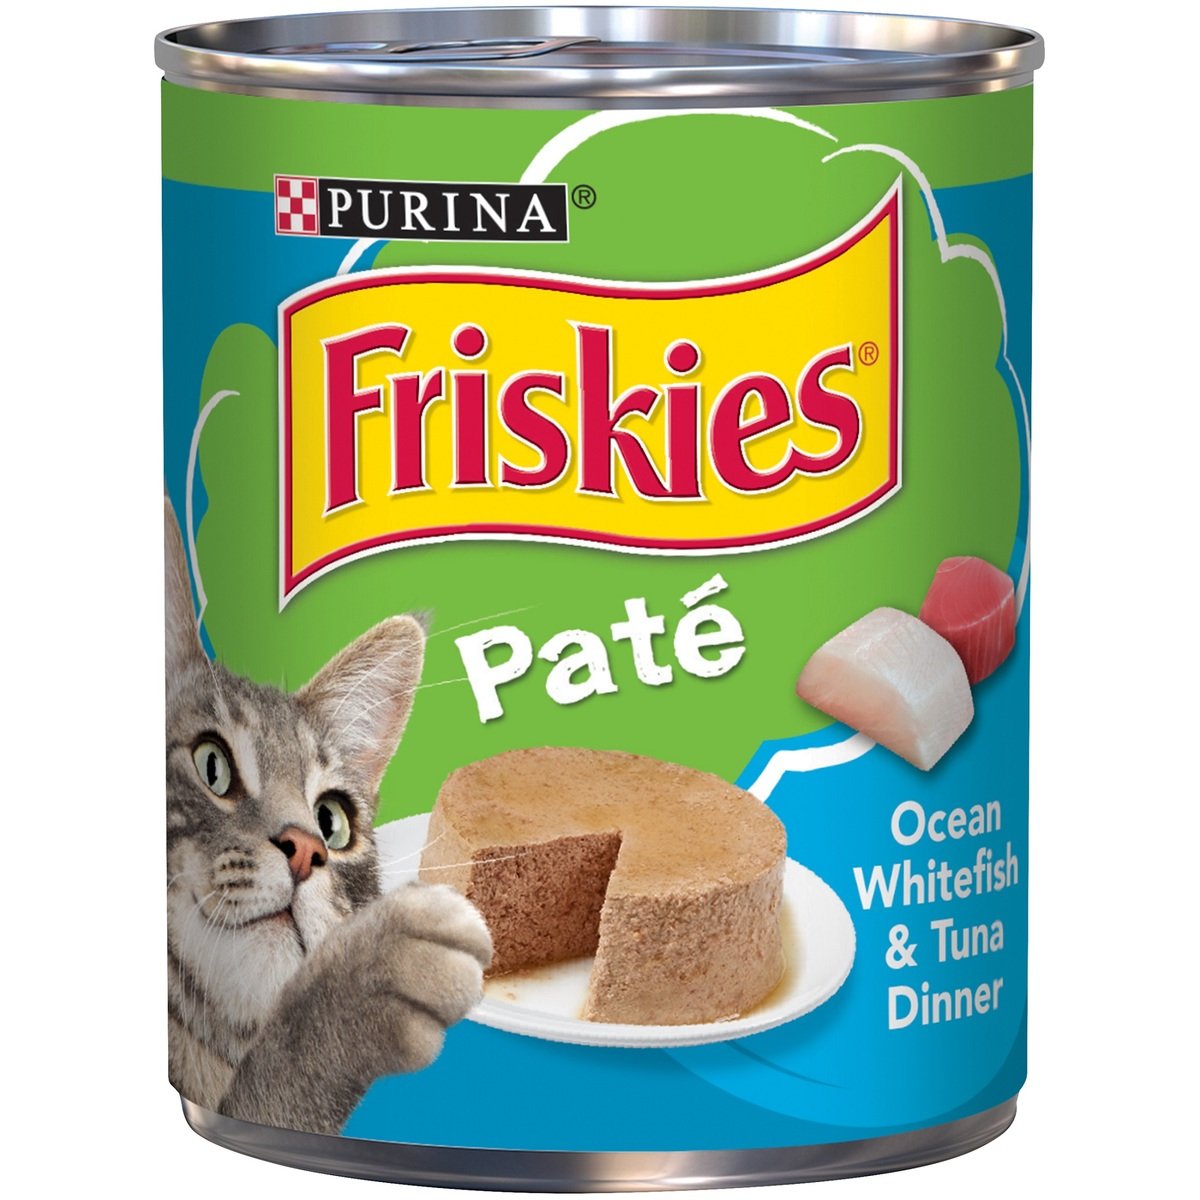 Purina Friskies Pate Ocean White Fish Wet Can Cat Food 368 g